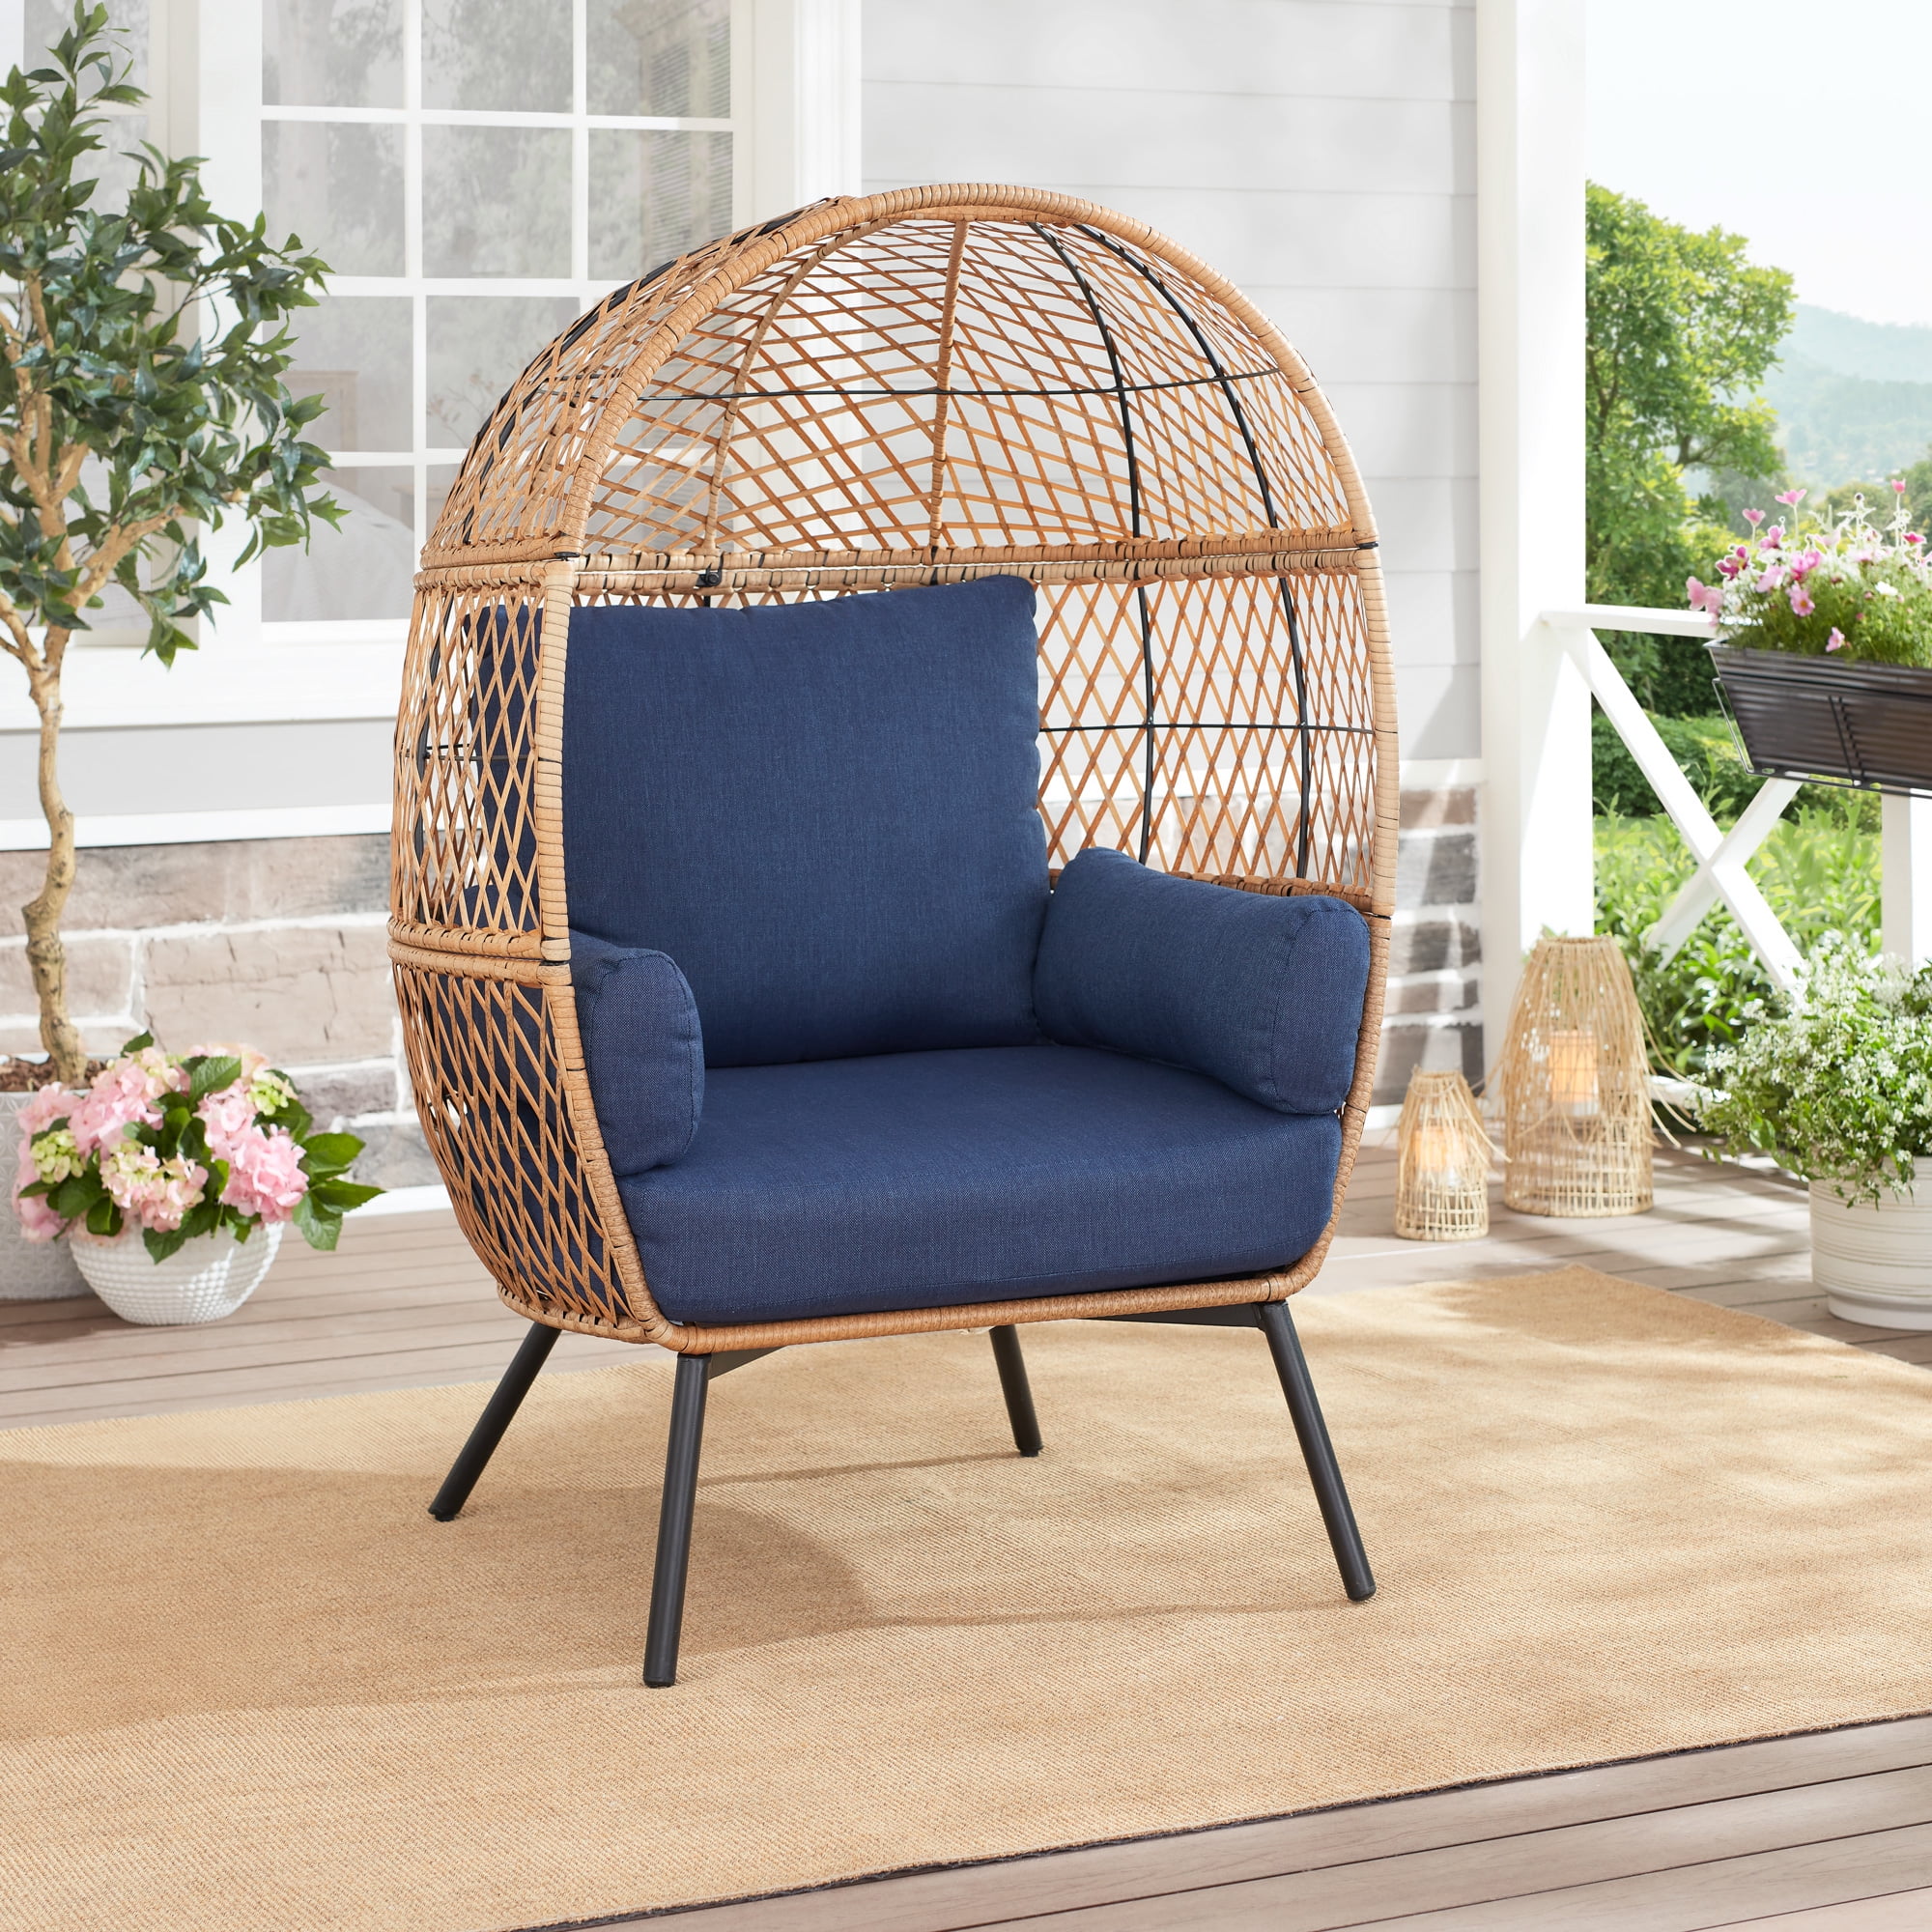 Wicker Outdoor Egg Chair Blue, Are Egg Chairs Waterproof